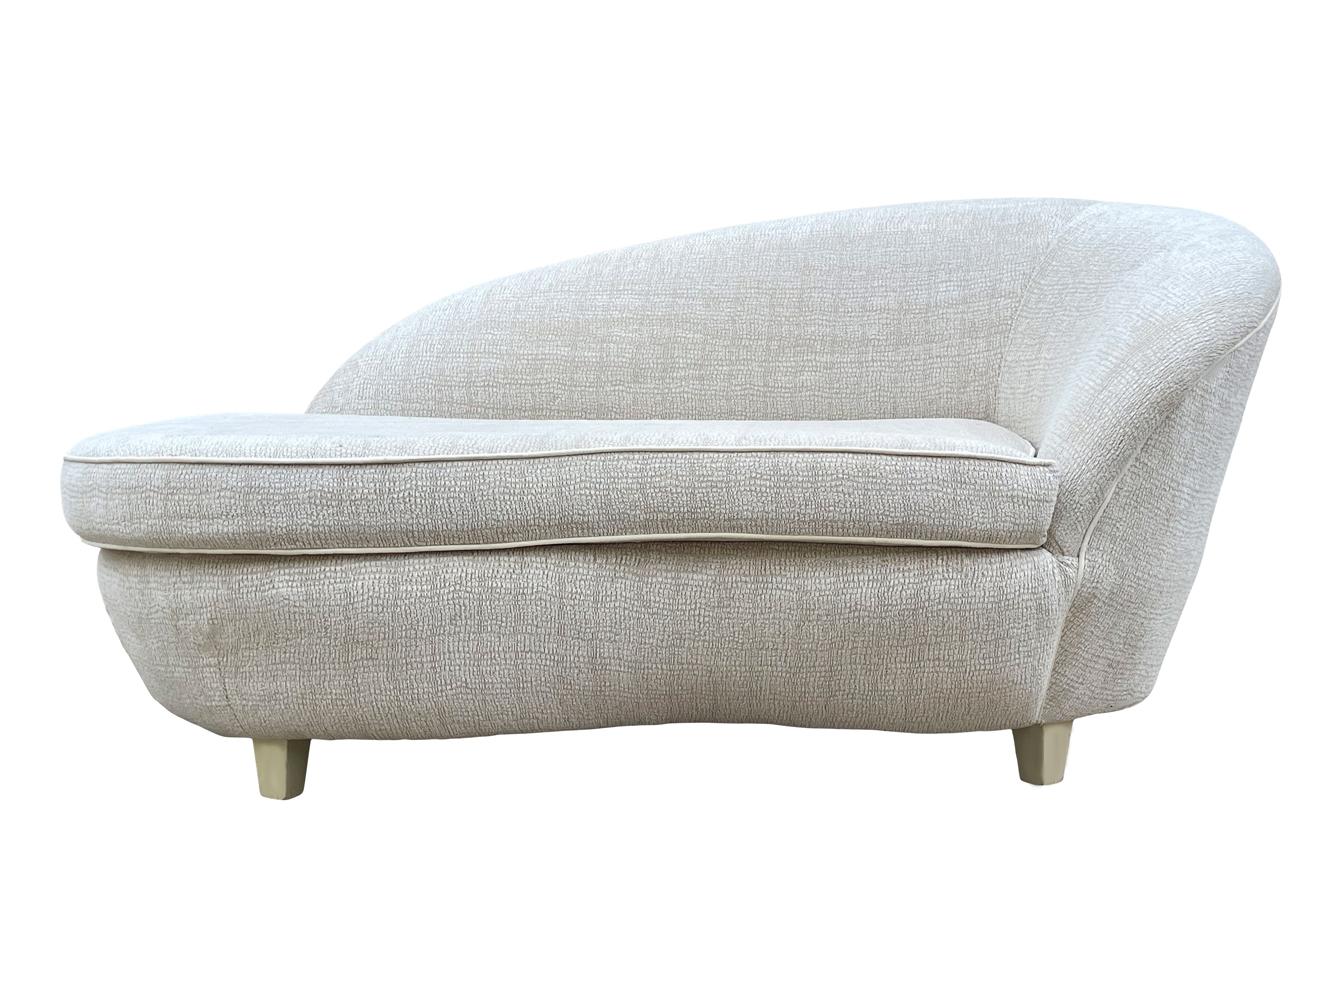 A beautiful modern design chaise lounge. It features beige wood legs with it's original upholstery. The fabric will need updating. Padding and foam are excellent.